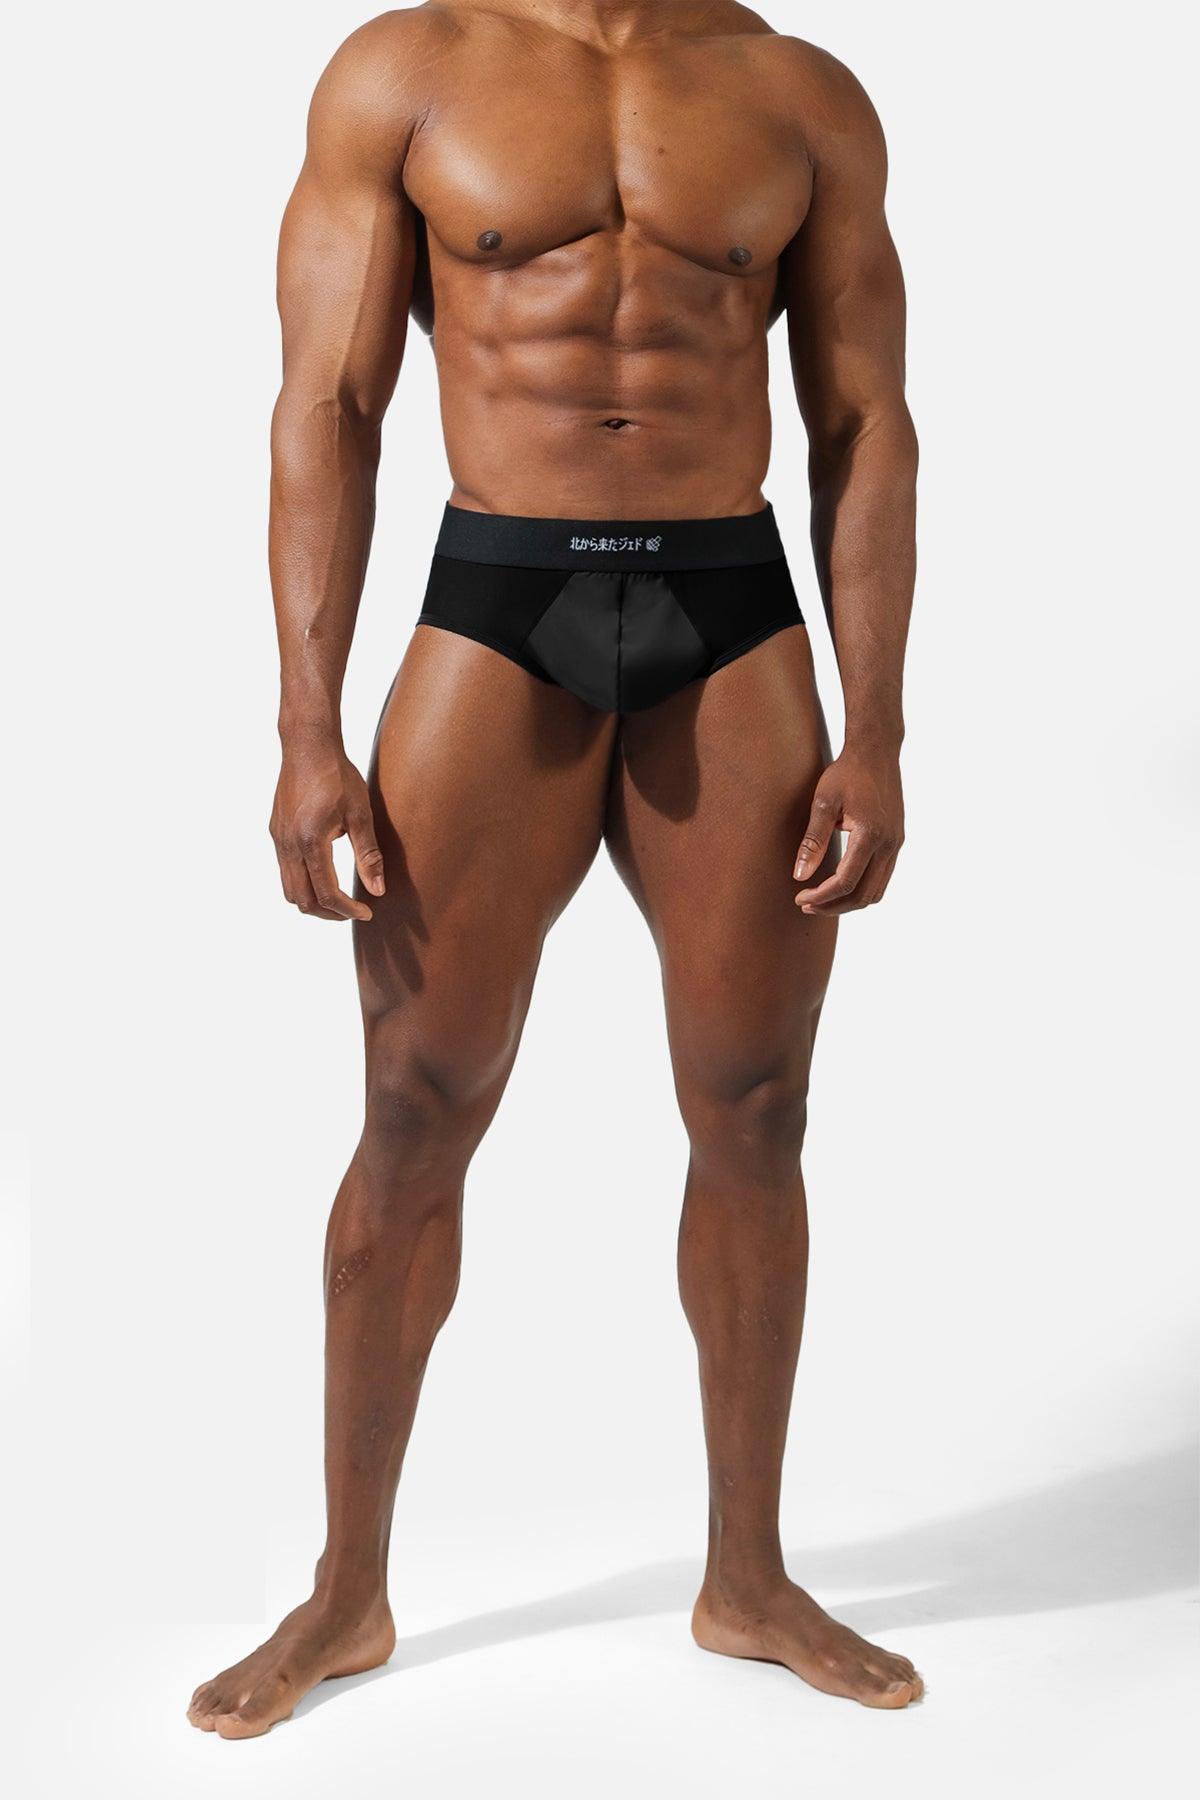 Men's Workout Mesh Briefs 2 Pack - Black & Navy - Jed North Canada